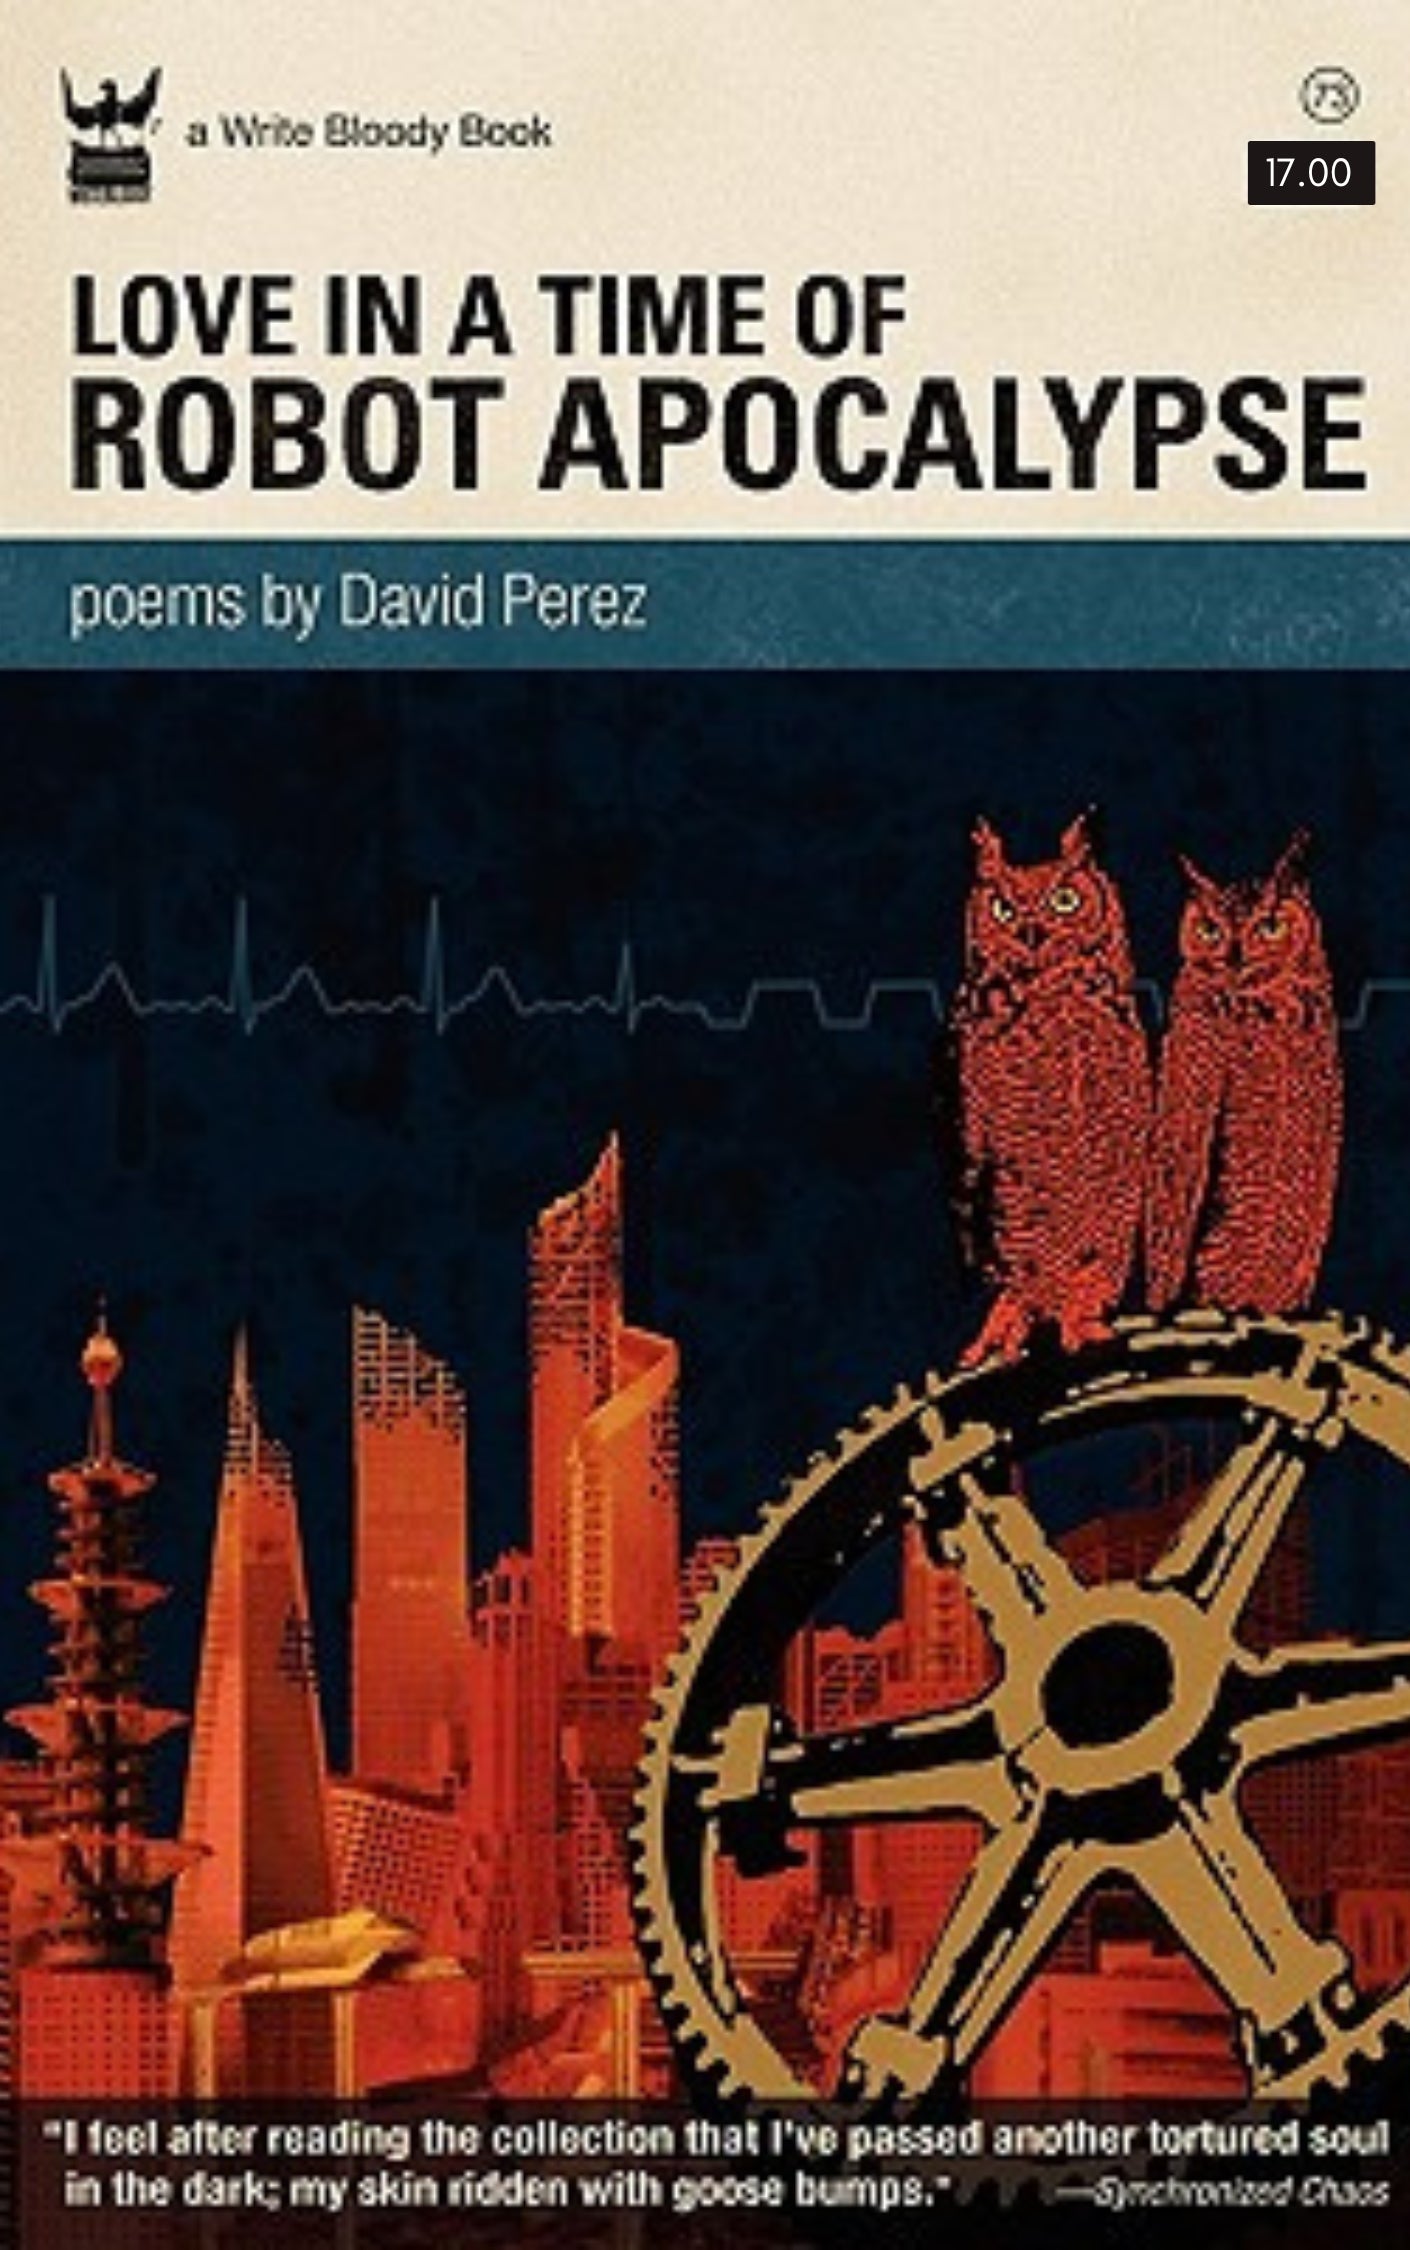 Love in a Time of Robot Apocalypse by David Perez